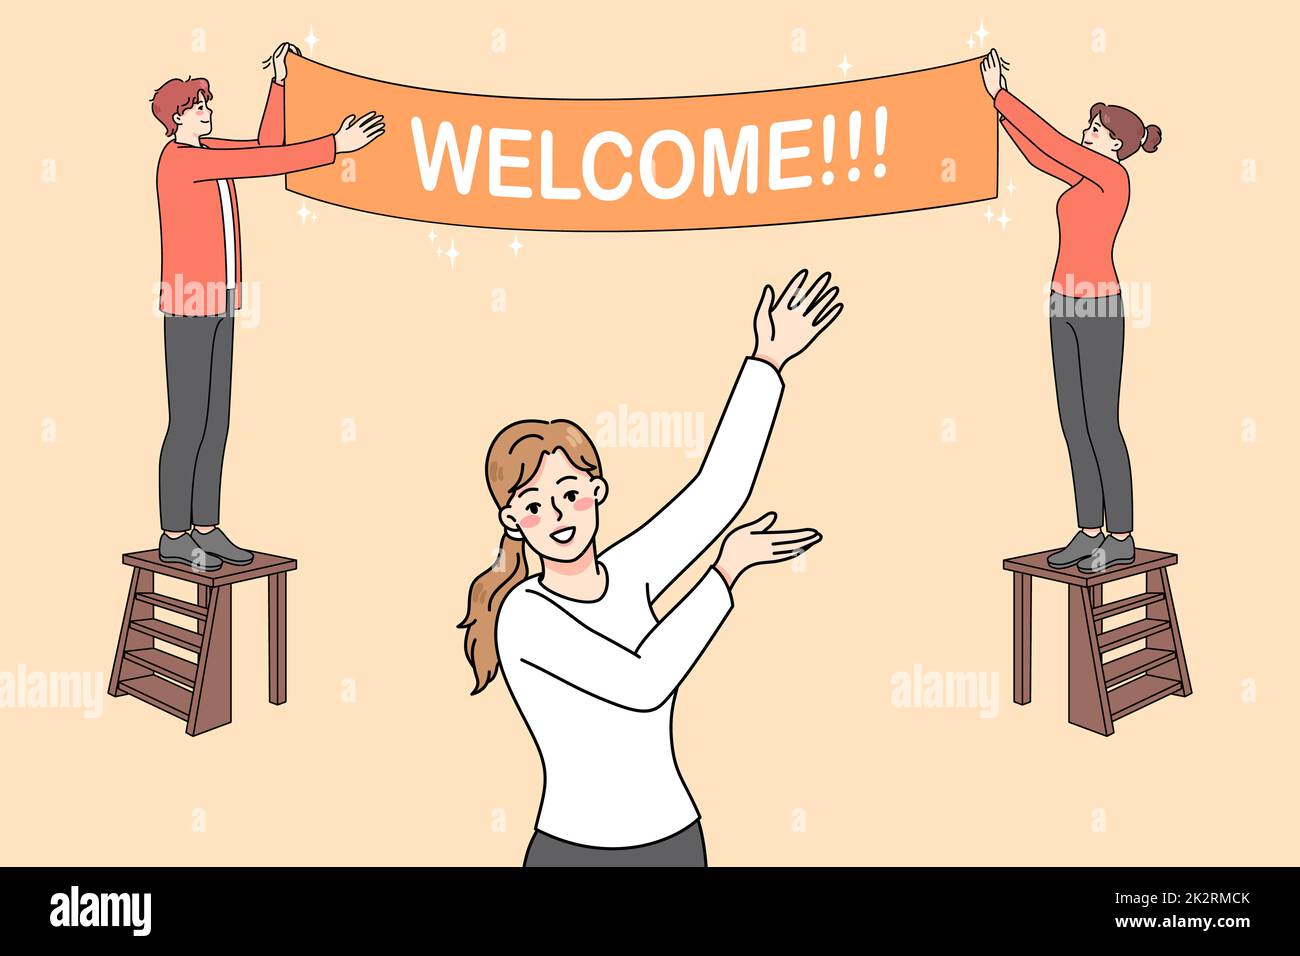 Happy people hanging welcome banner Stock Photo